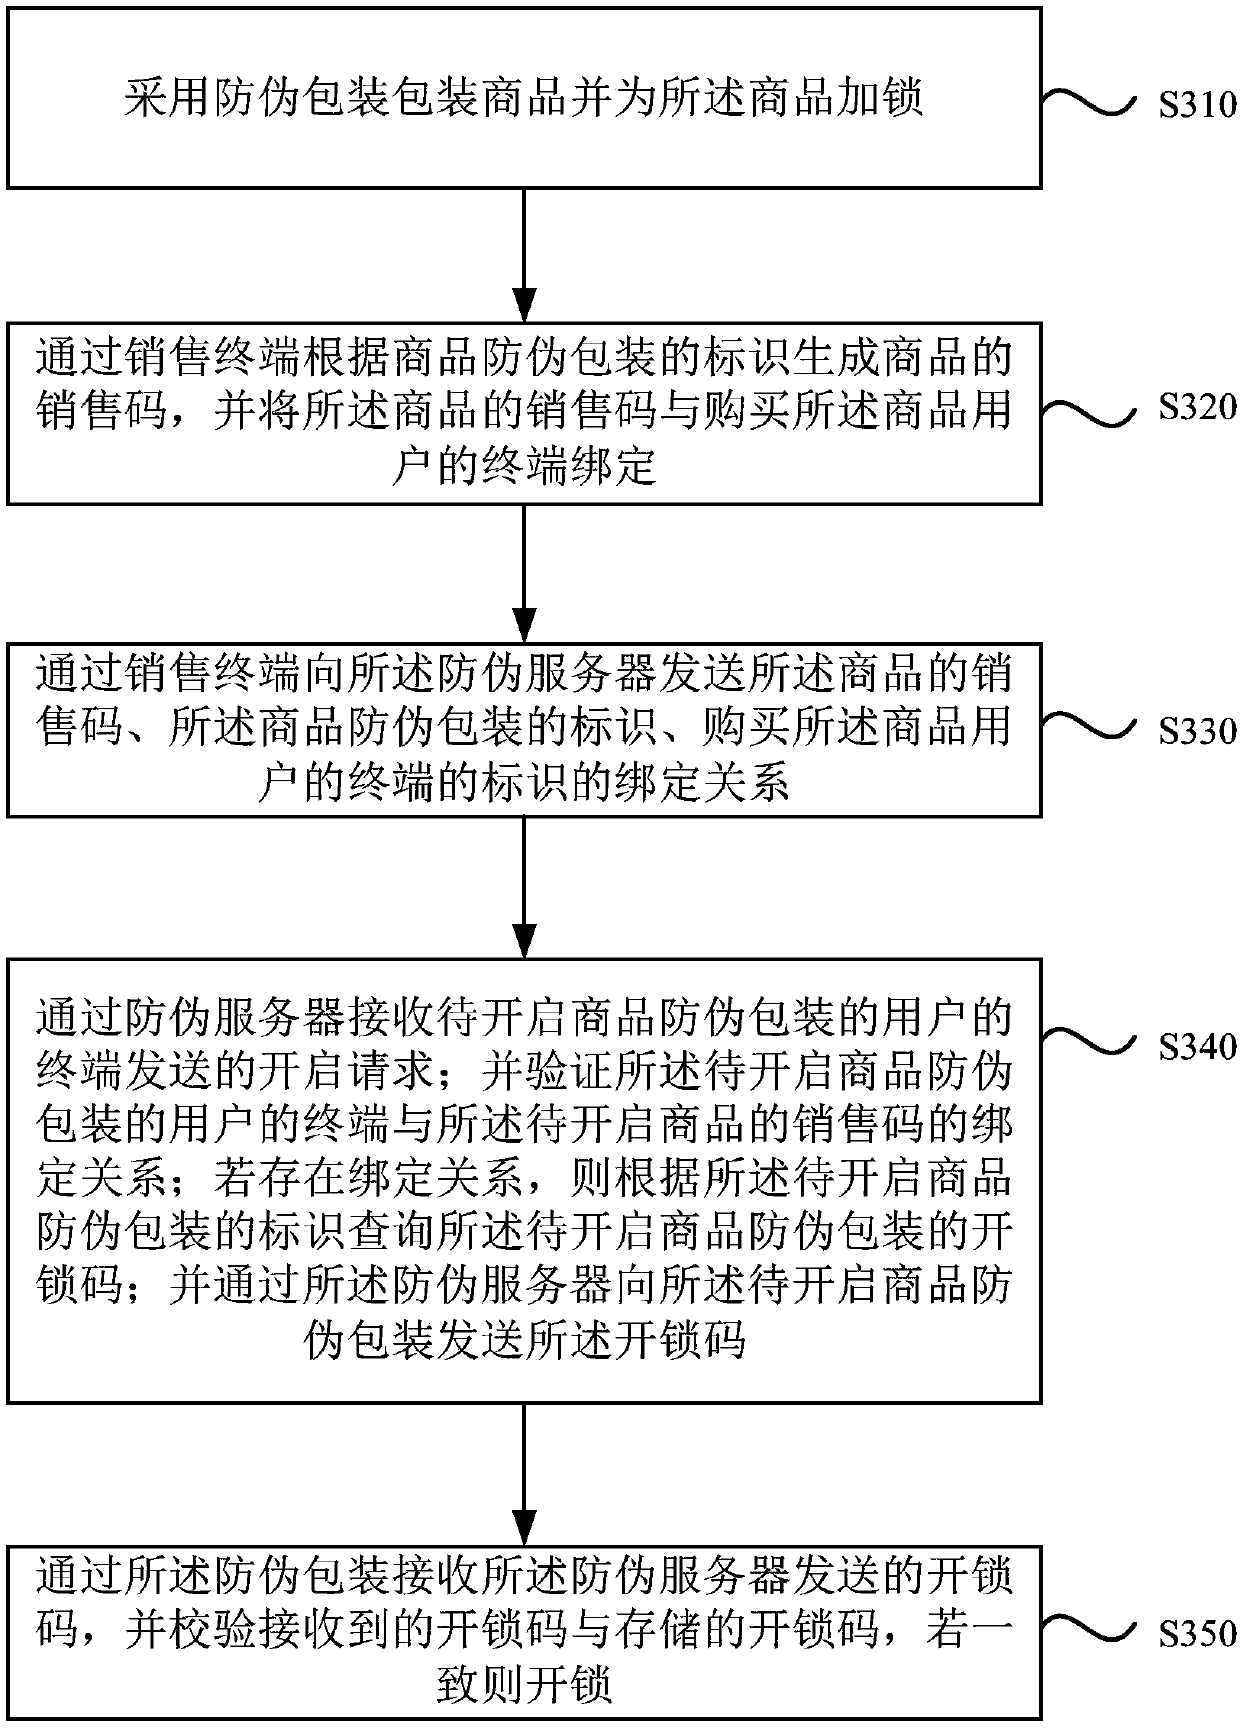 Electronic anti-counterfeiting system and anti-counterfeiting method